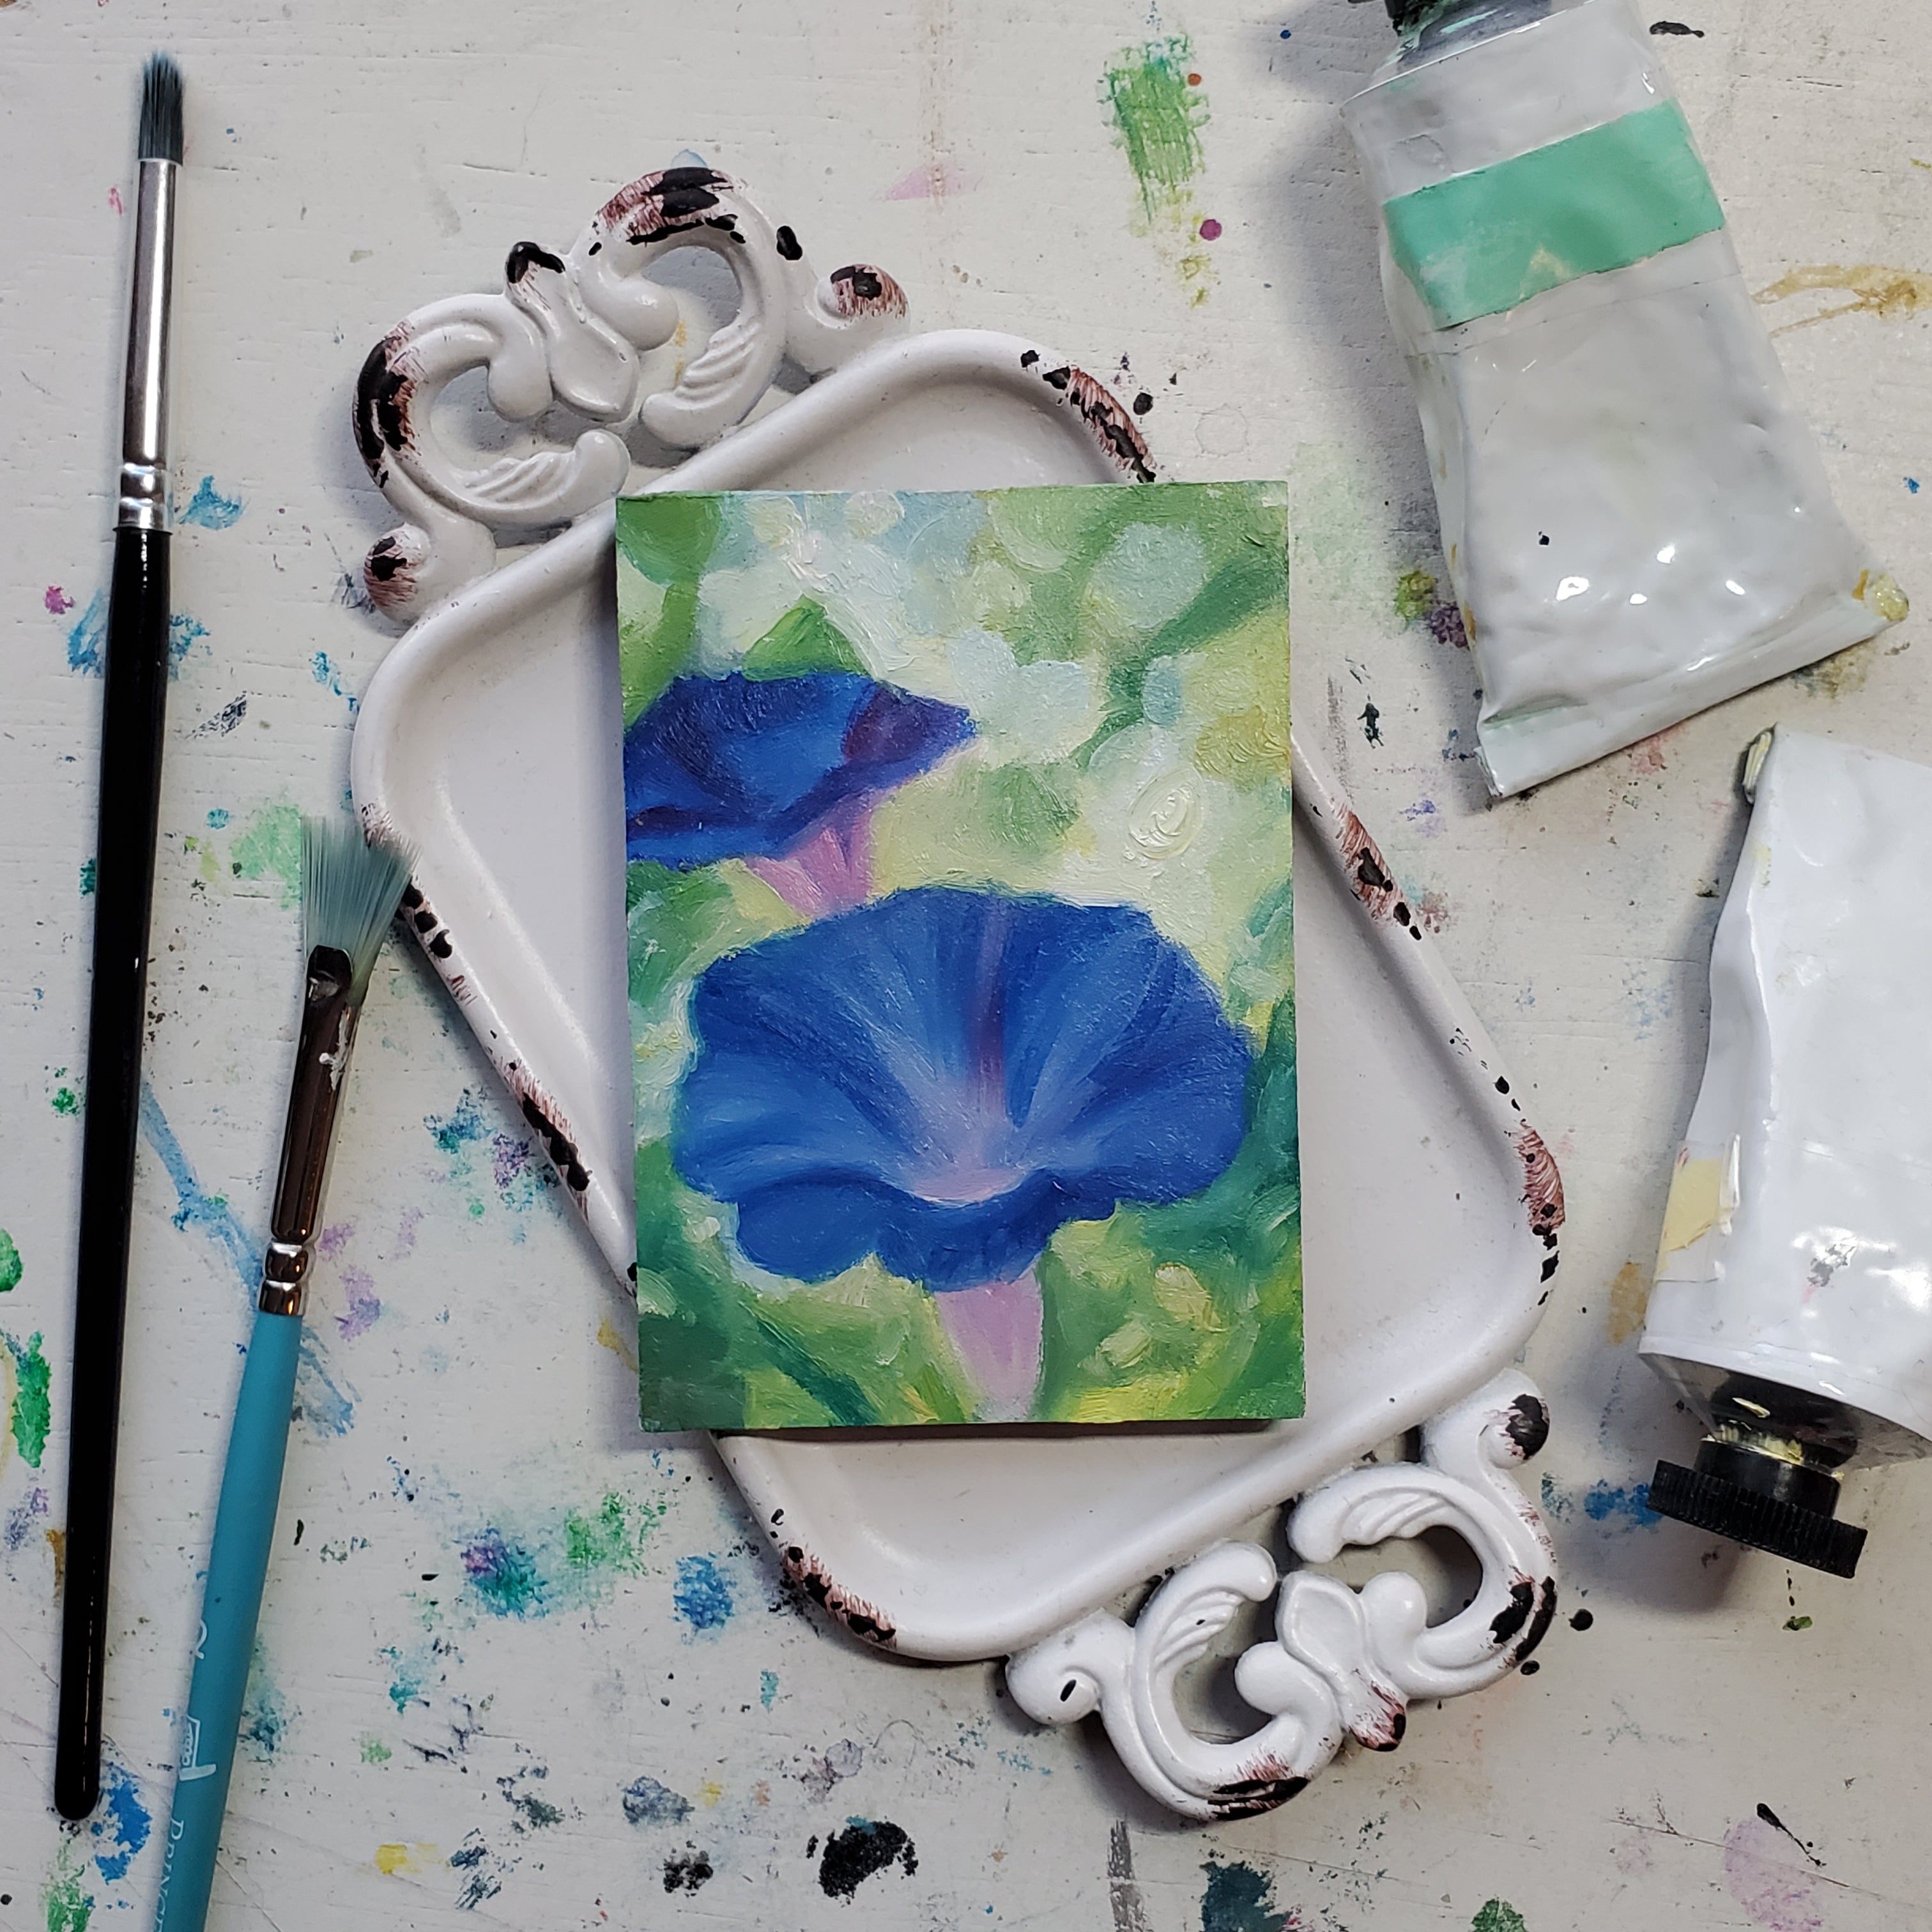 Morning Glory || Mini Oil Painting on Panel || Display Easel Included